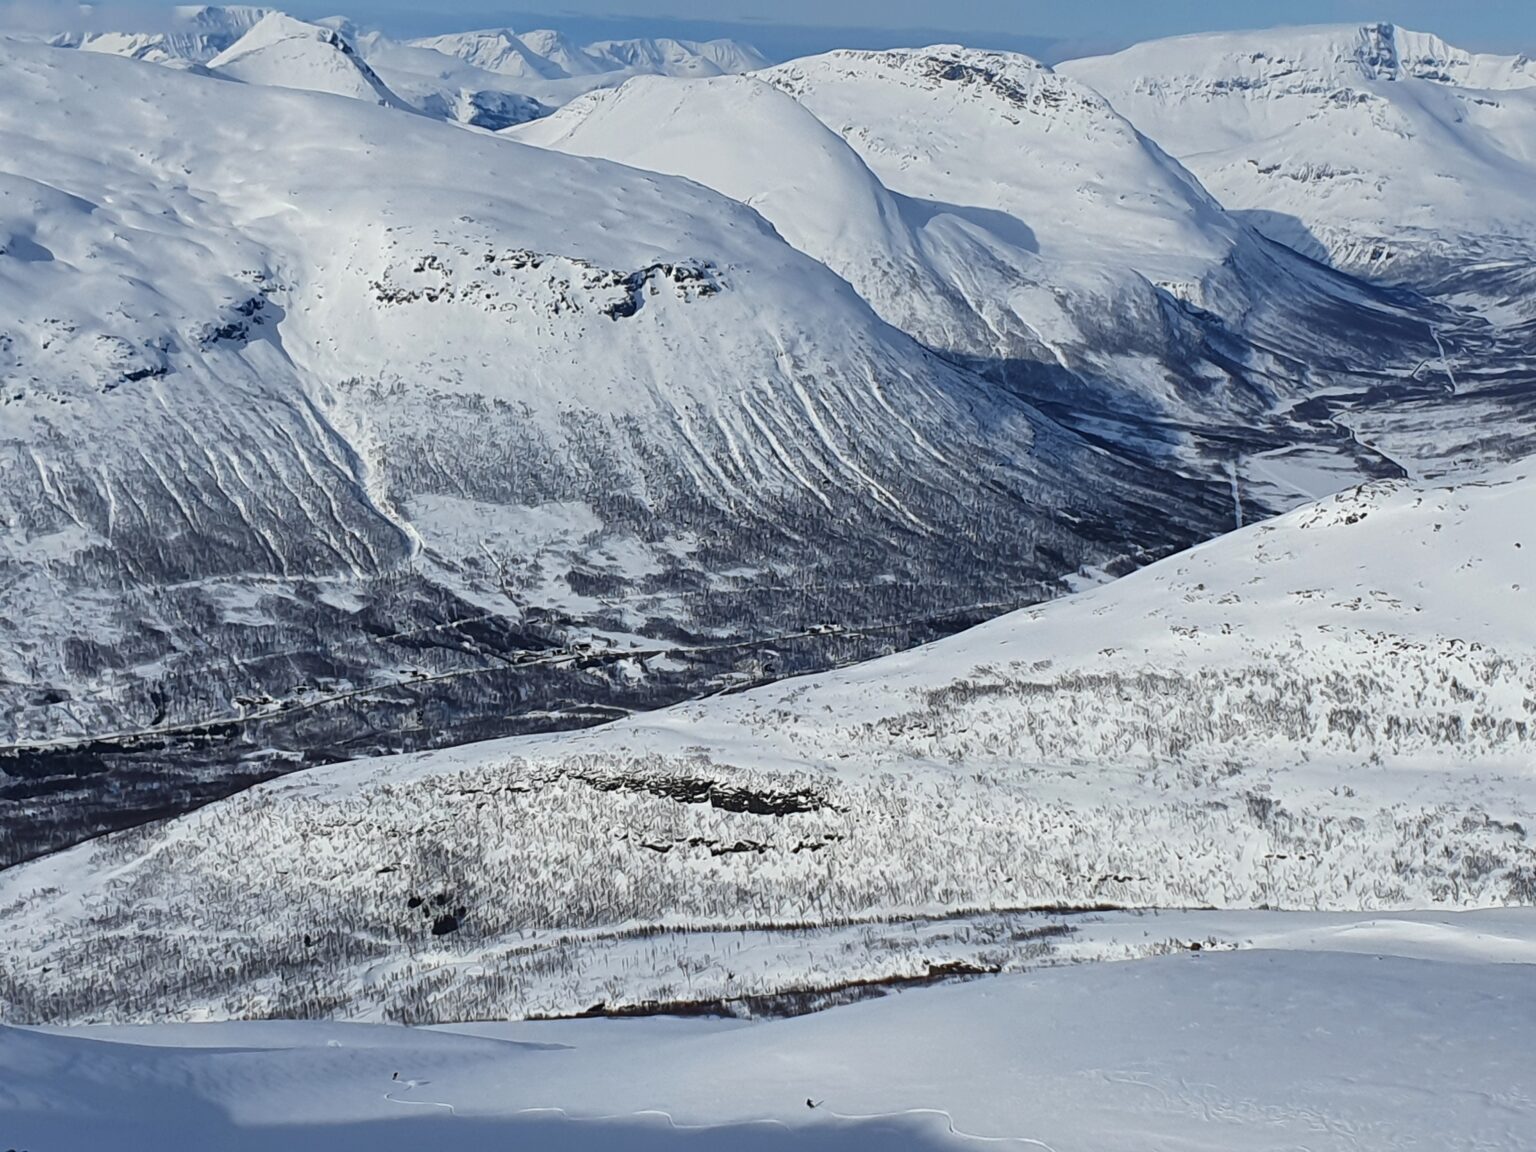 Two tracks snowboarding down Istinden Ridge with the Tamokdalen Backcountry in the Distance